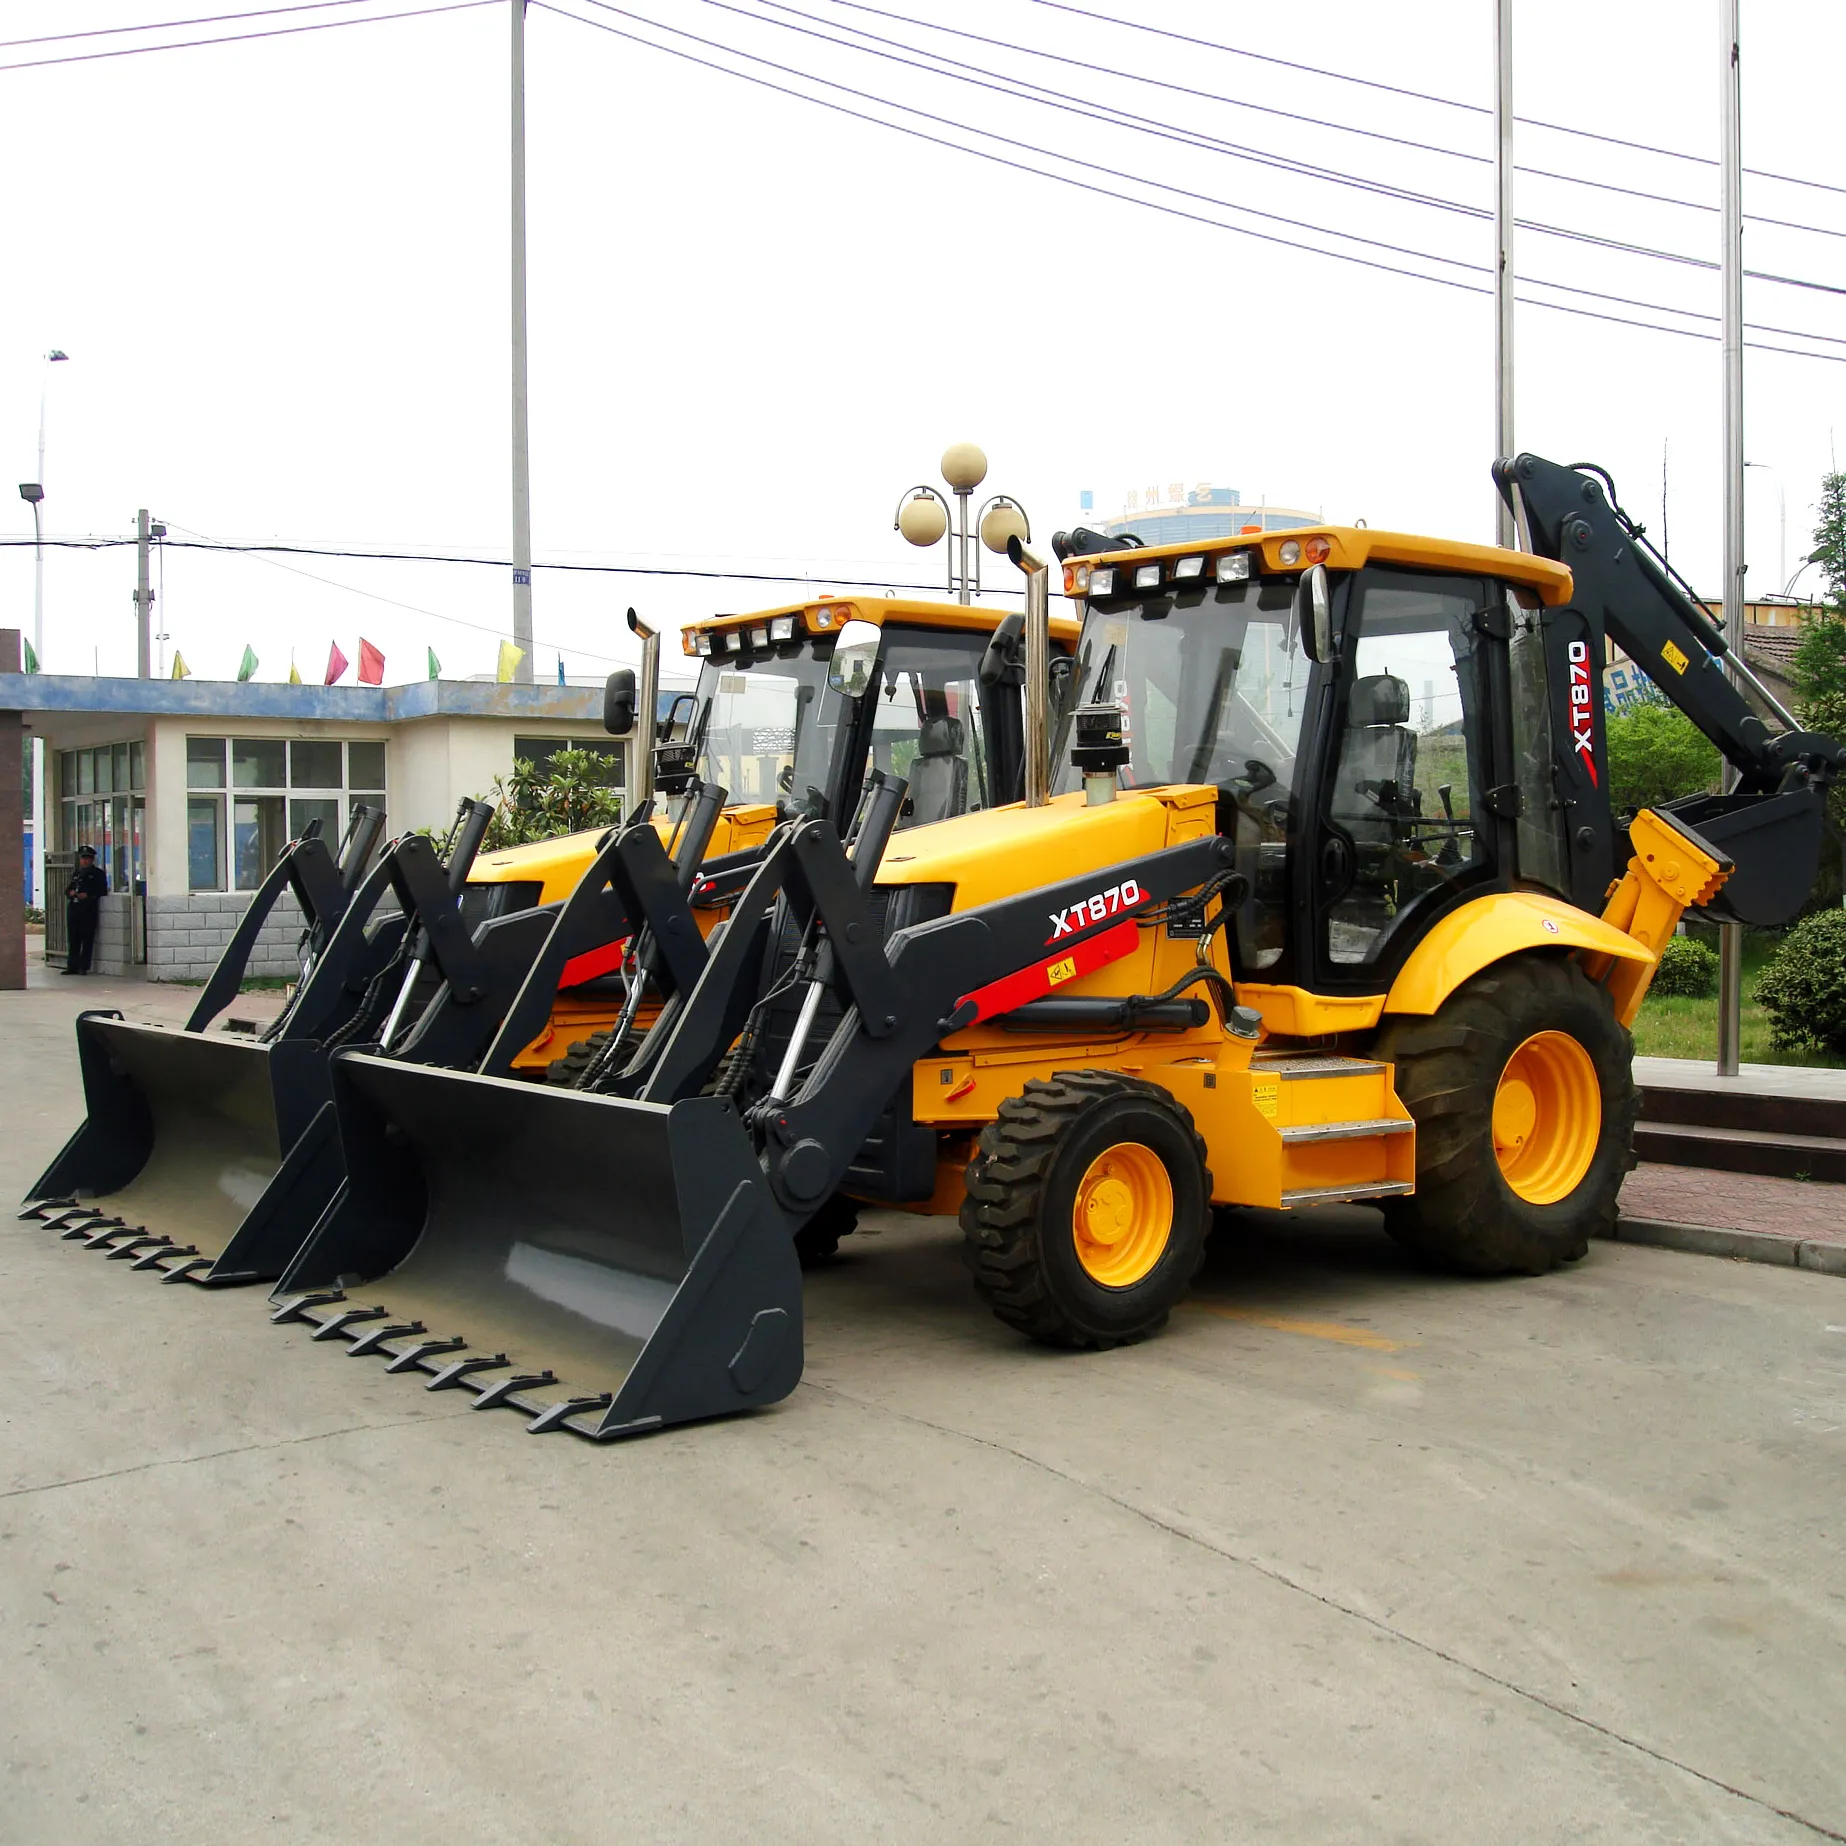 China New Brand Hot Sale Backhoe Loader XT870K With High Quality Price For Hot Sale